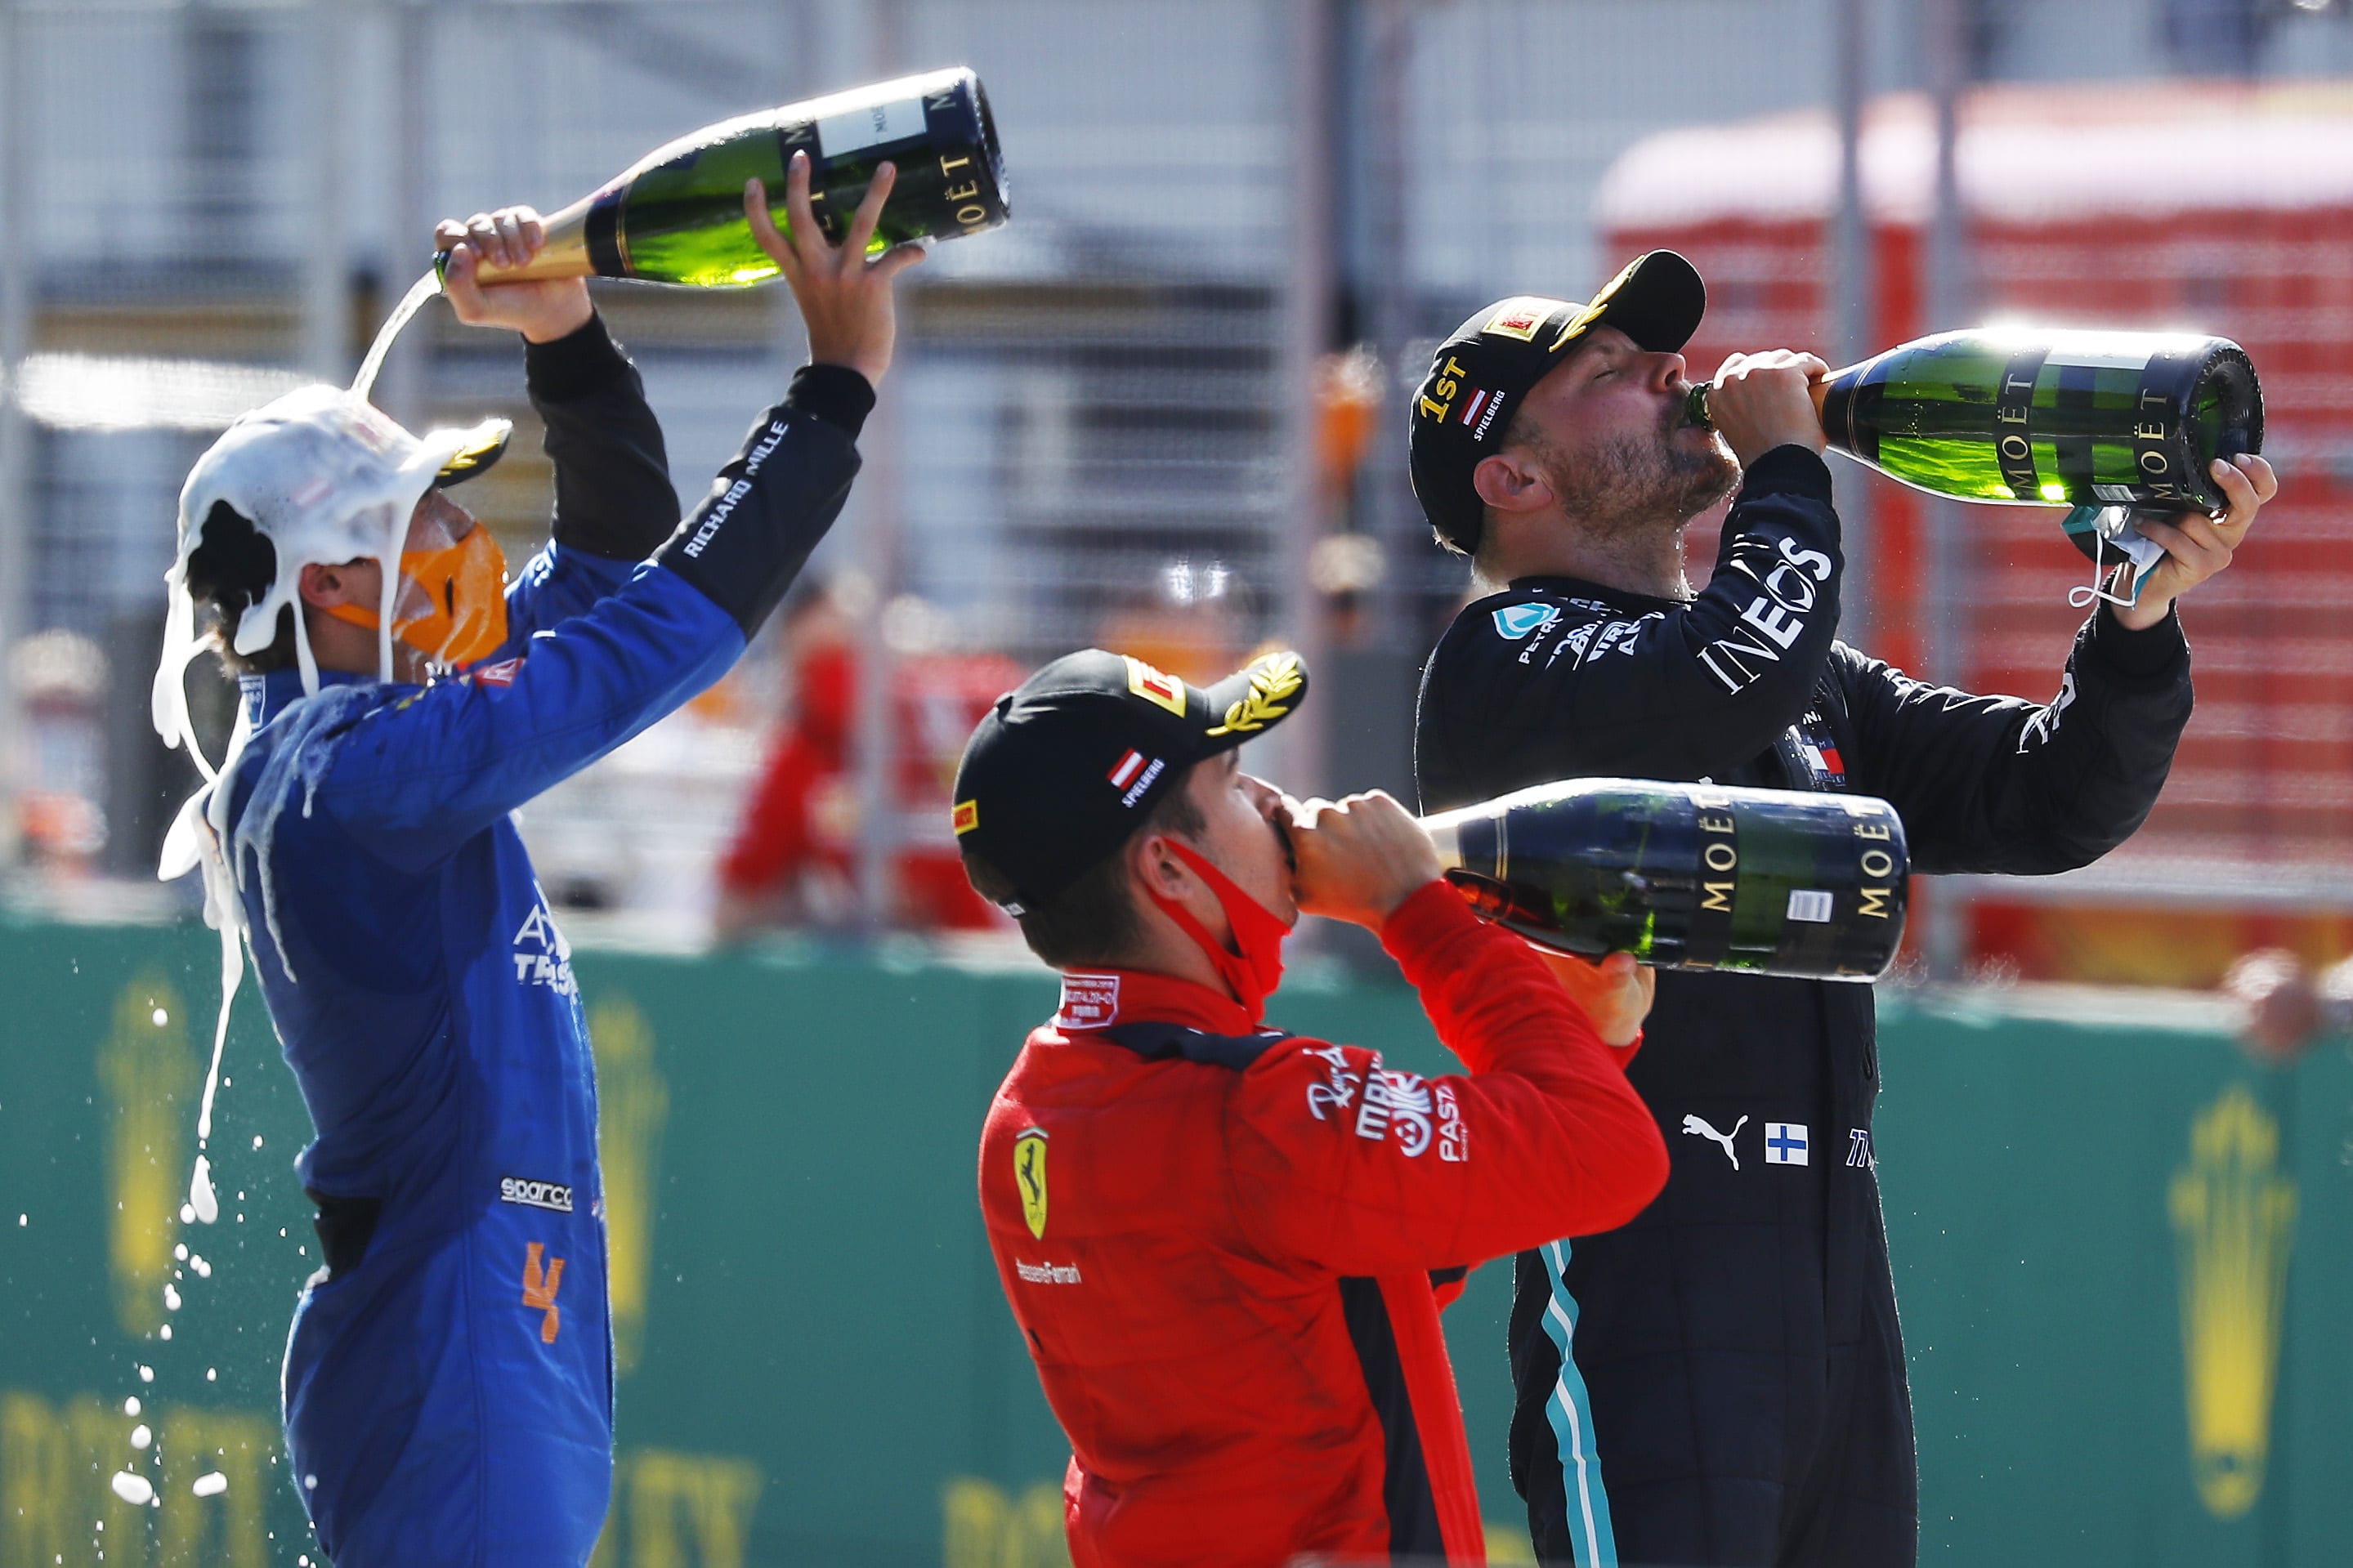 Baron hypocrisy never Austrian Grand Prix 2020 race report and highlights: Bottas beats Leclerc  and Norris to win dramatic first race of 2020 as is Hamilton penalised | Formula  1®